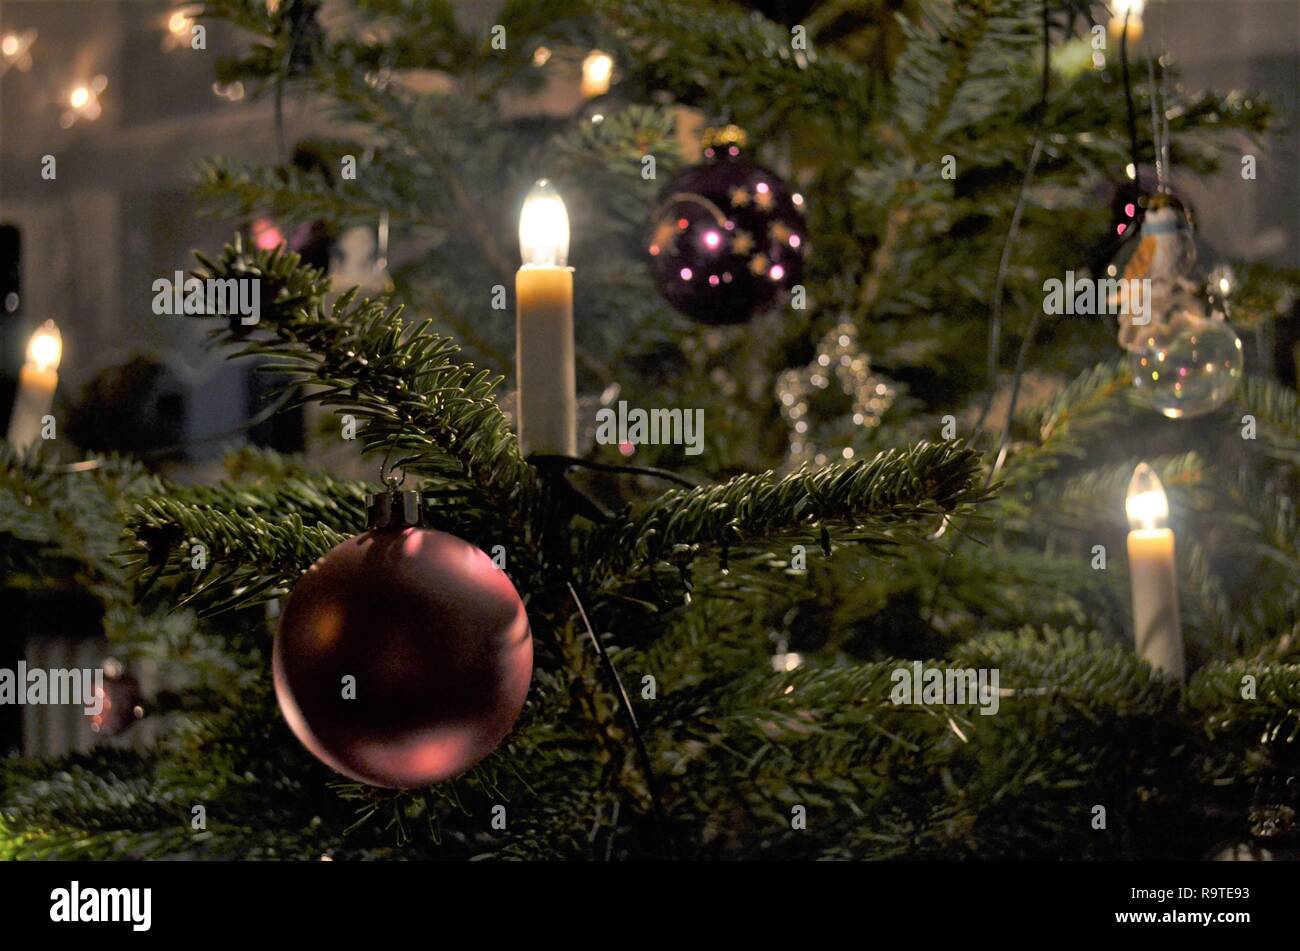 beautiful candles shining on a christmas tree with purple decorations, festive atmosphere Stock Photo